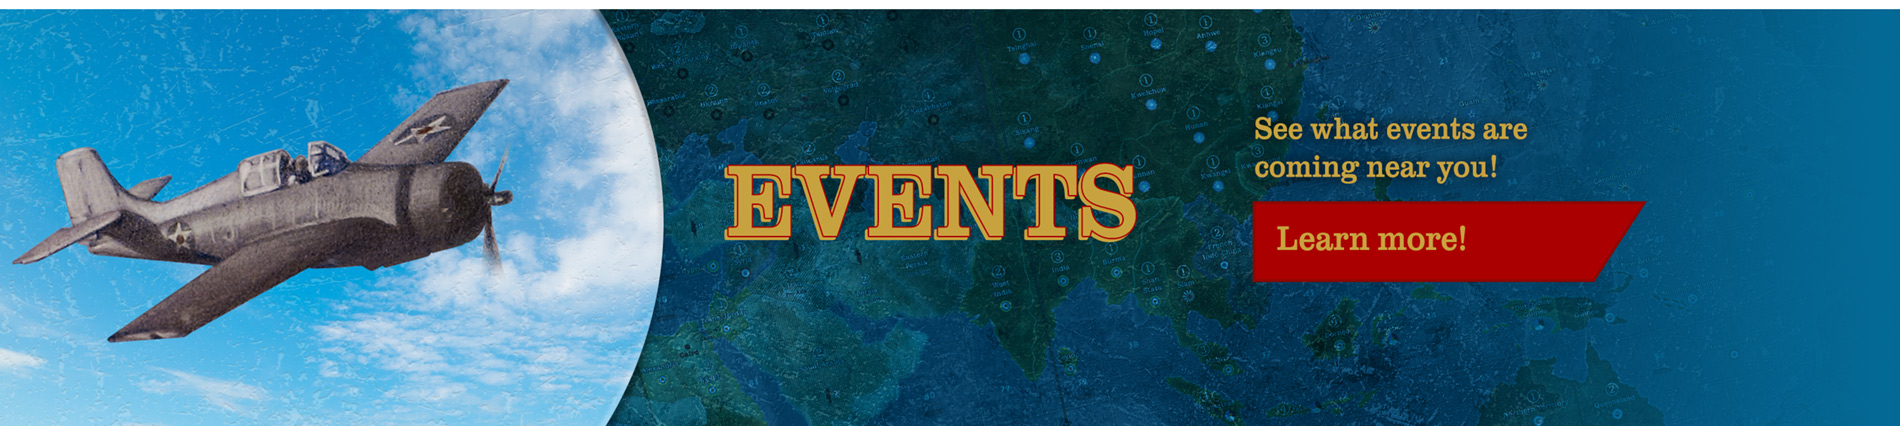 Events. See what events are coming near you! Click to navigate to the events page.